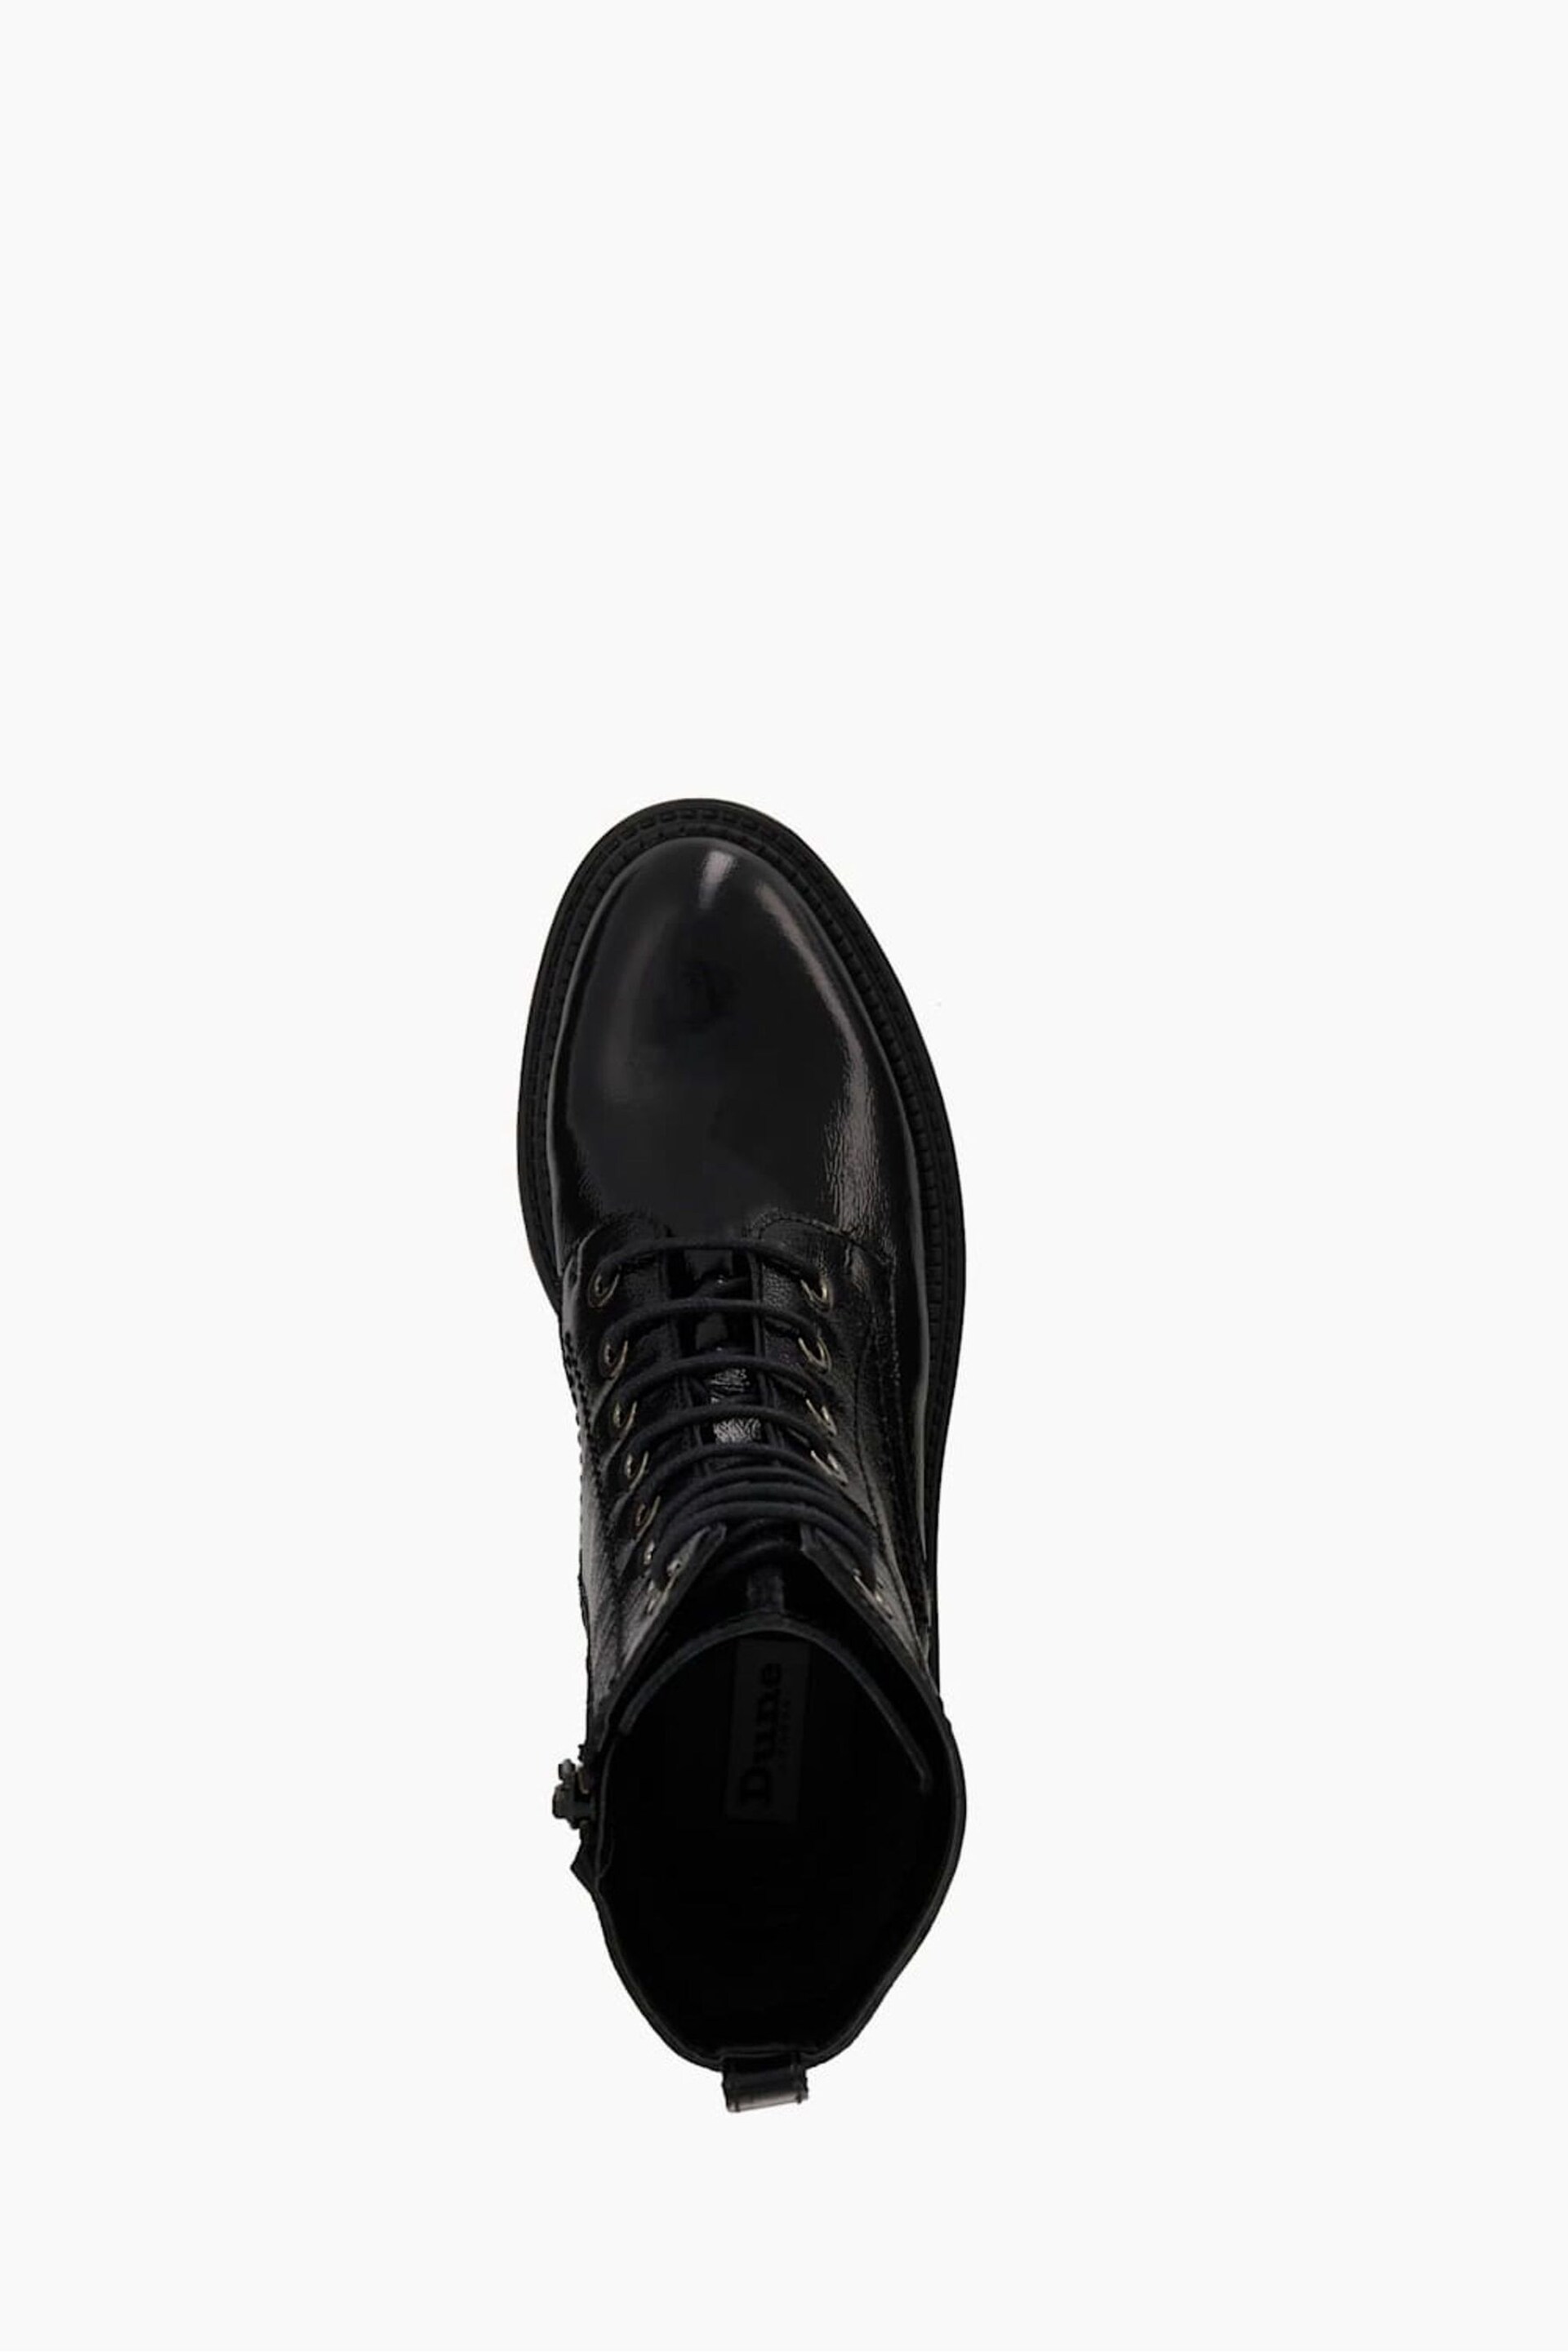 Dune London Black Press Cleated Hiker Boots - Image 5 of 6